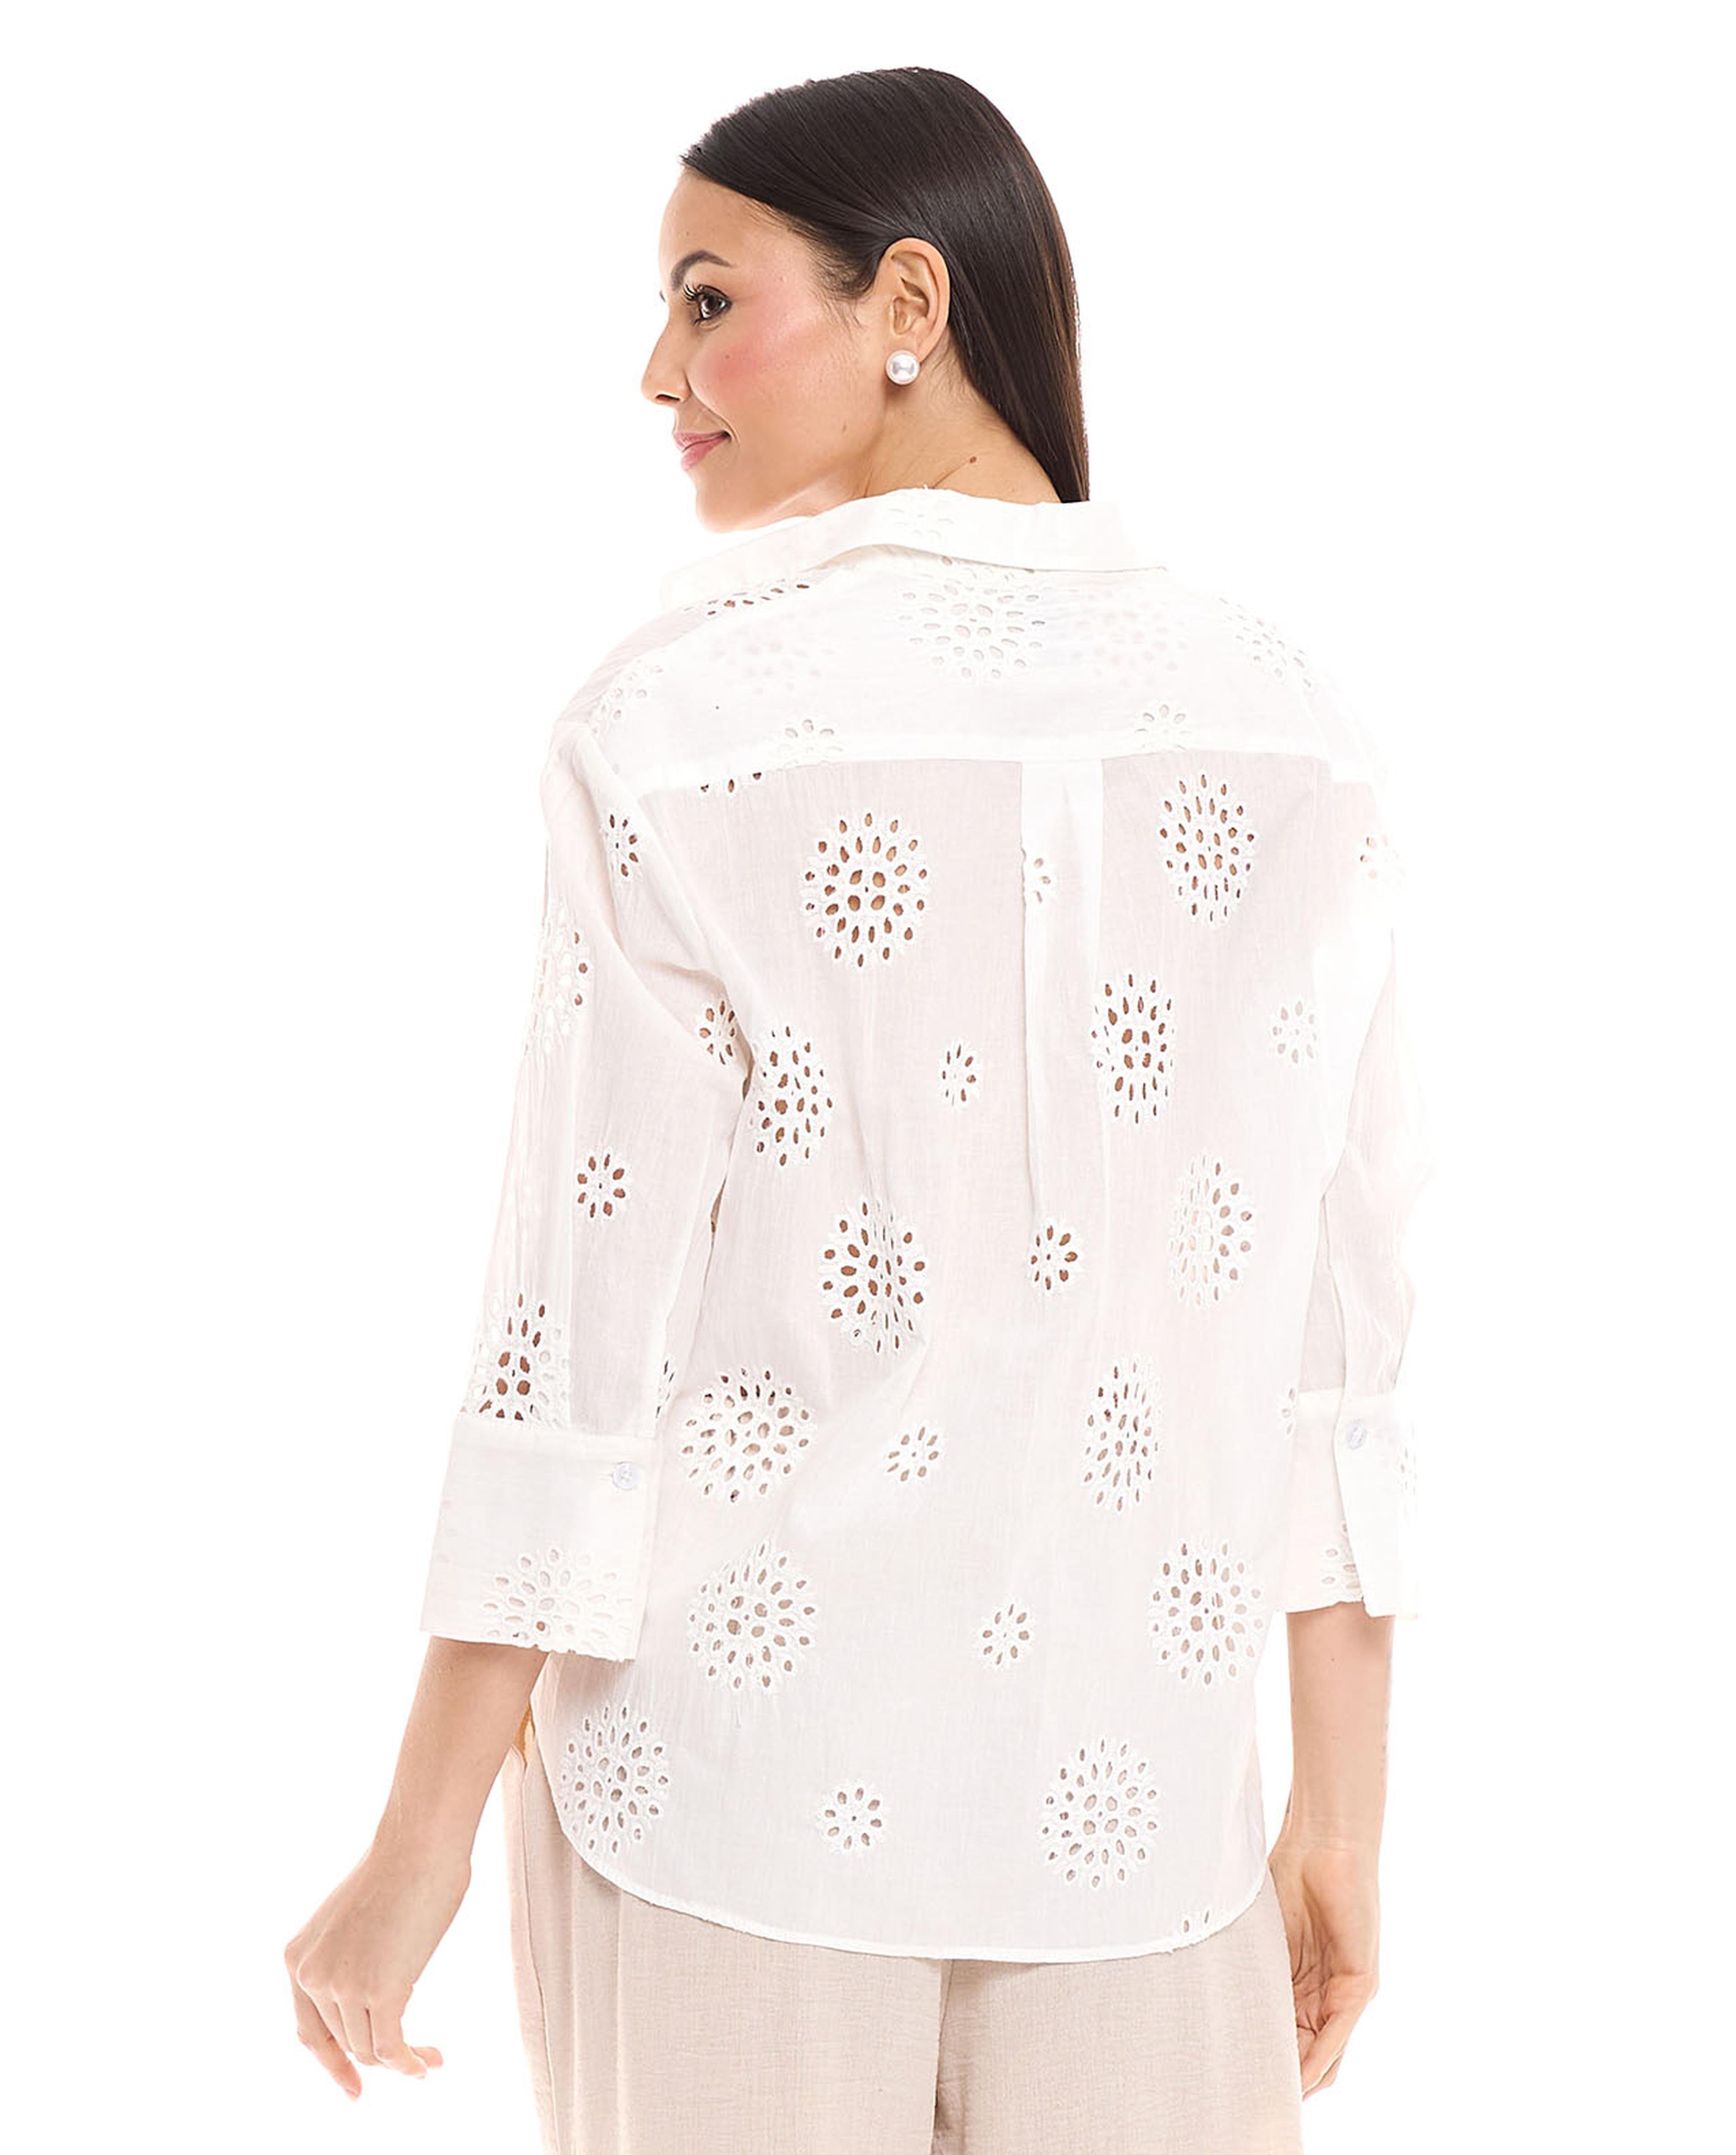 Openwork Shirt with Spread Collar and 3/4 Sleeves